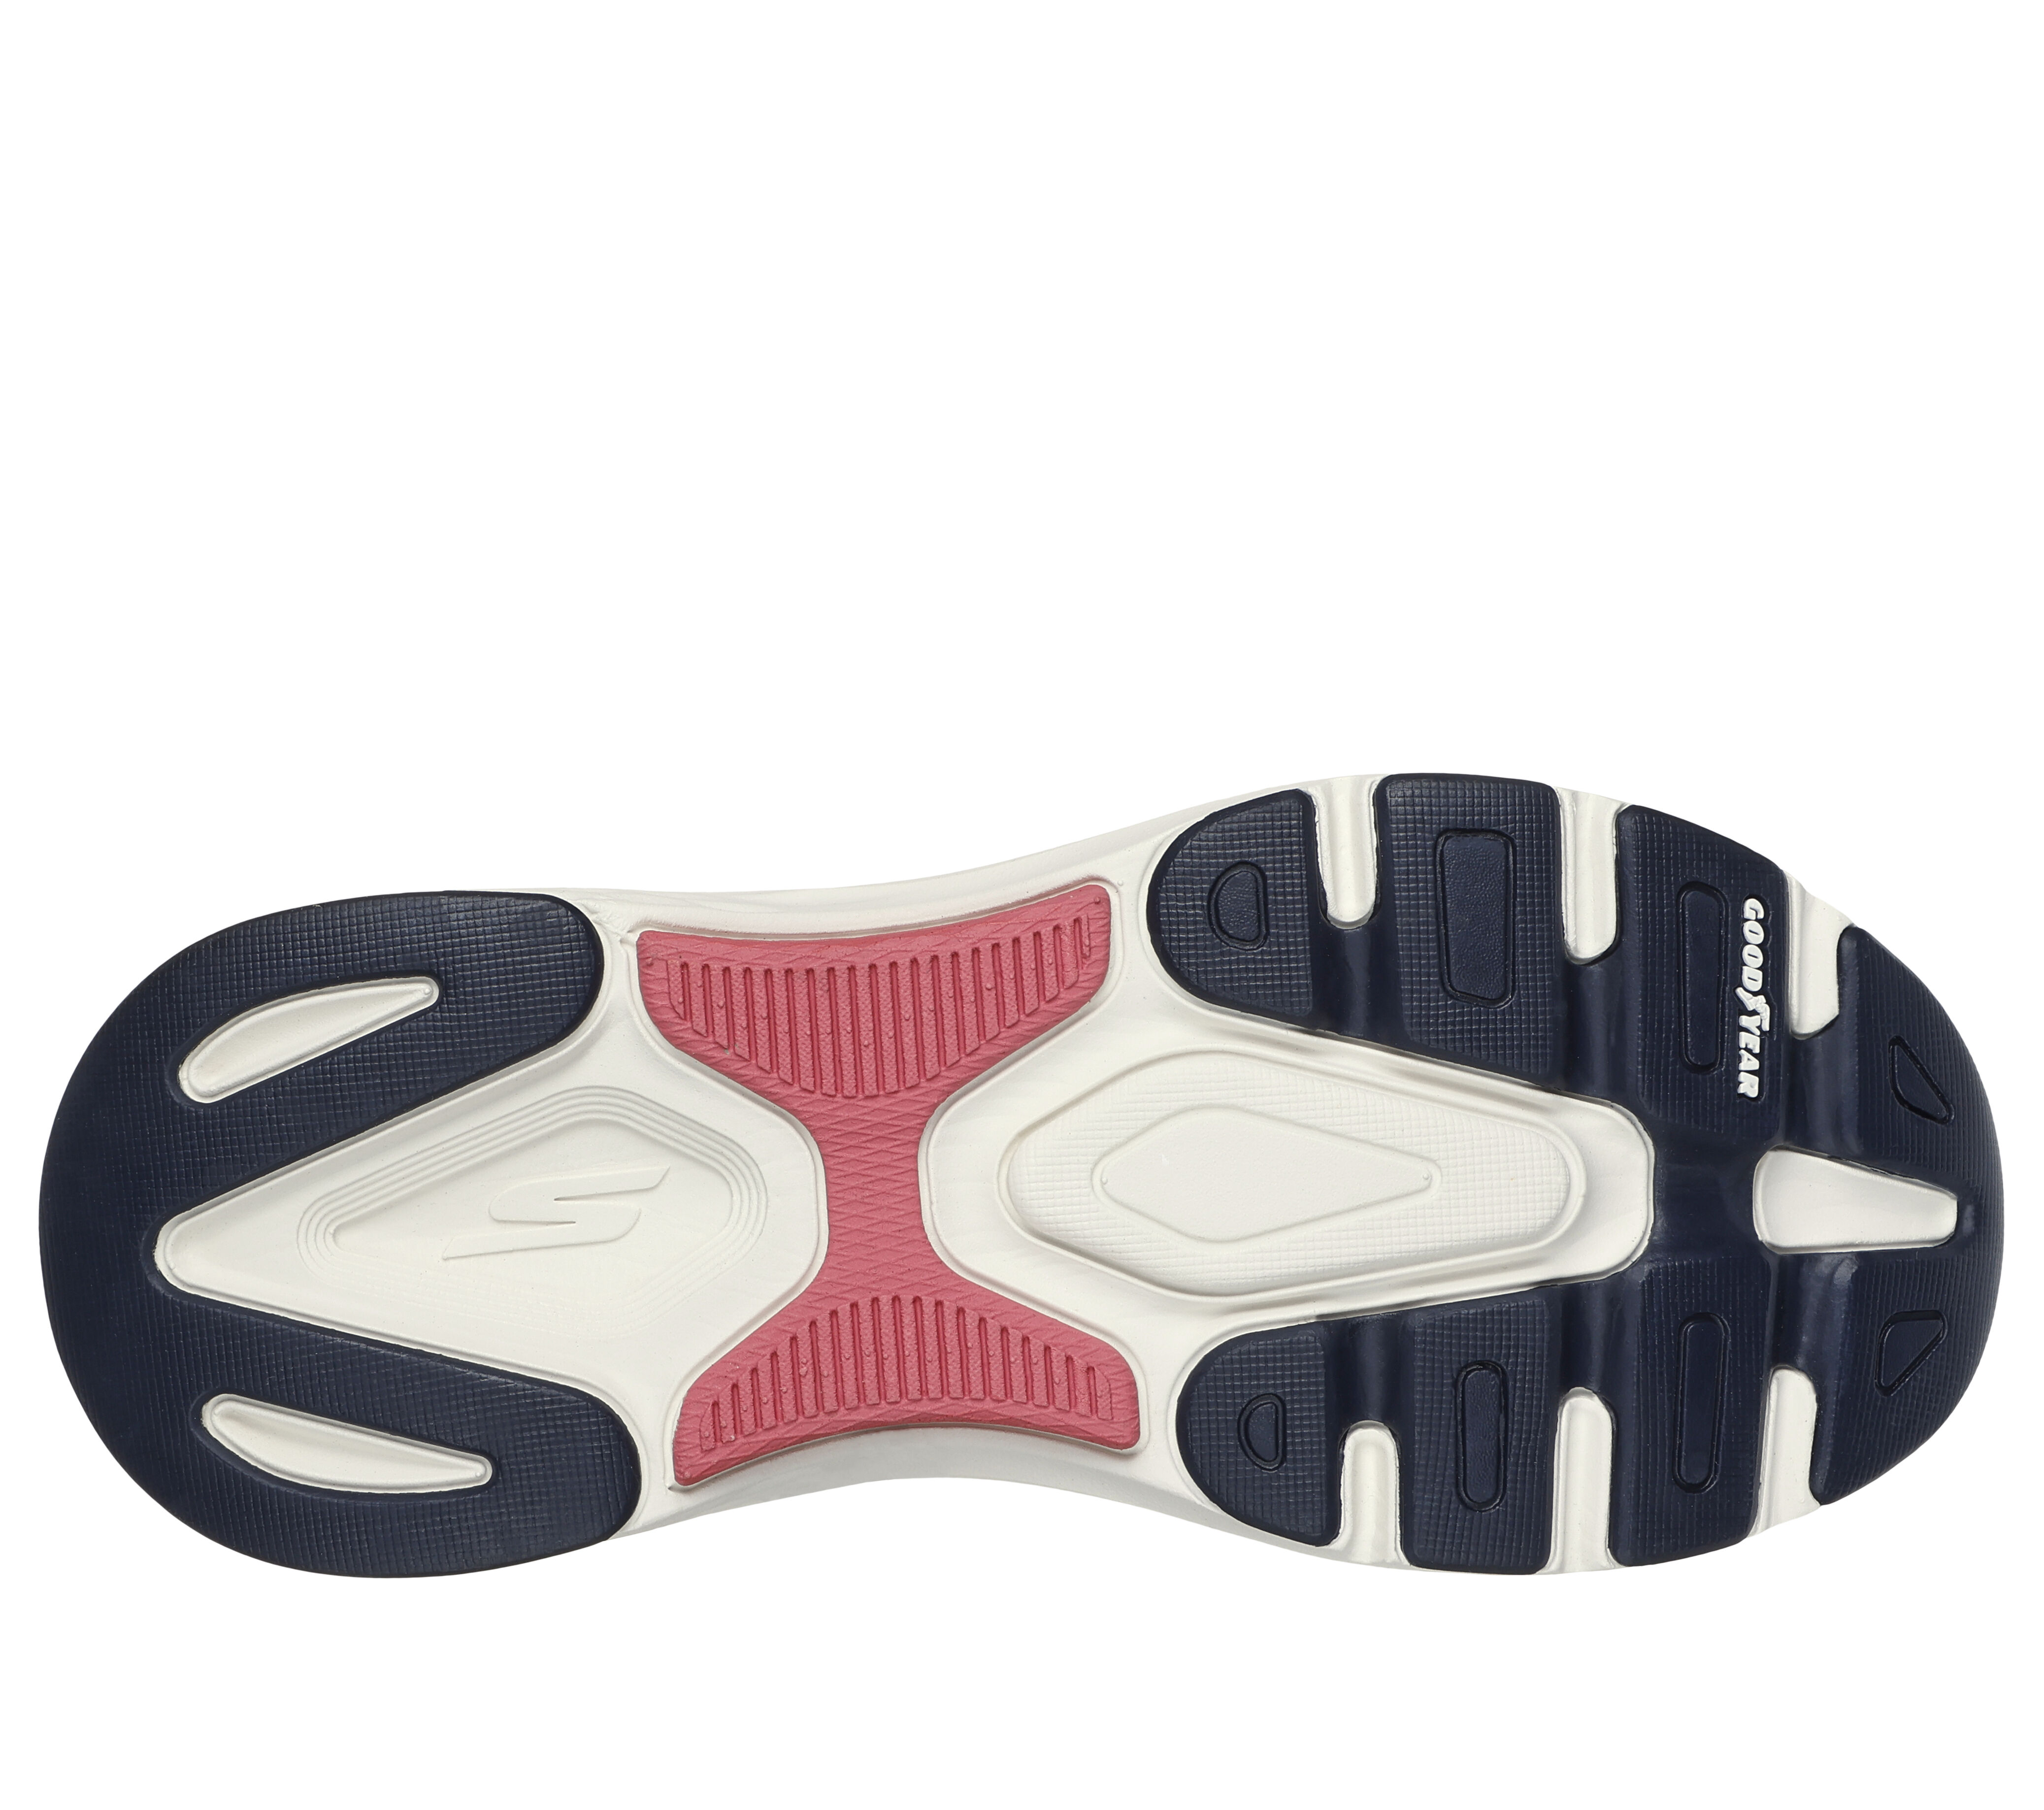 Max Cushioning Arch Fit - Velocity